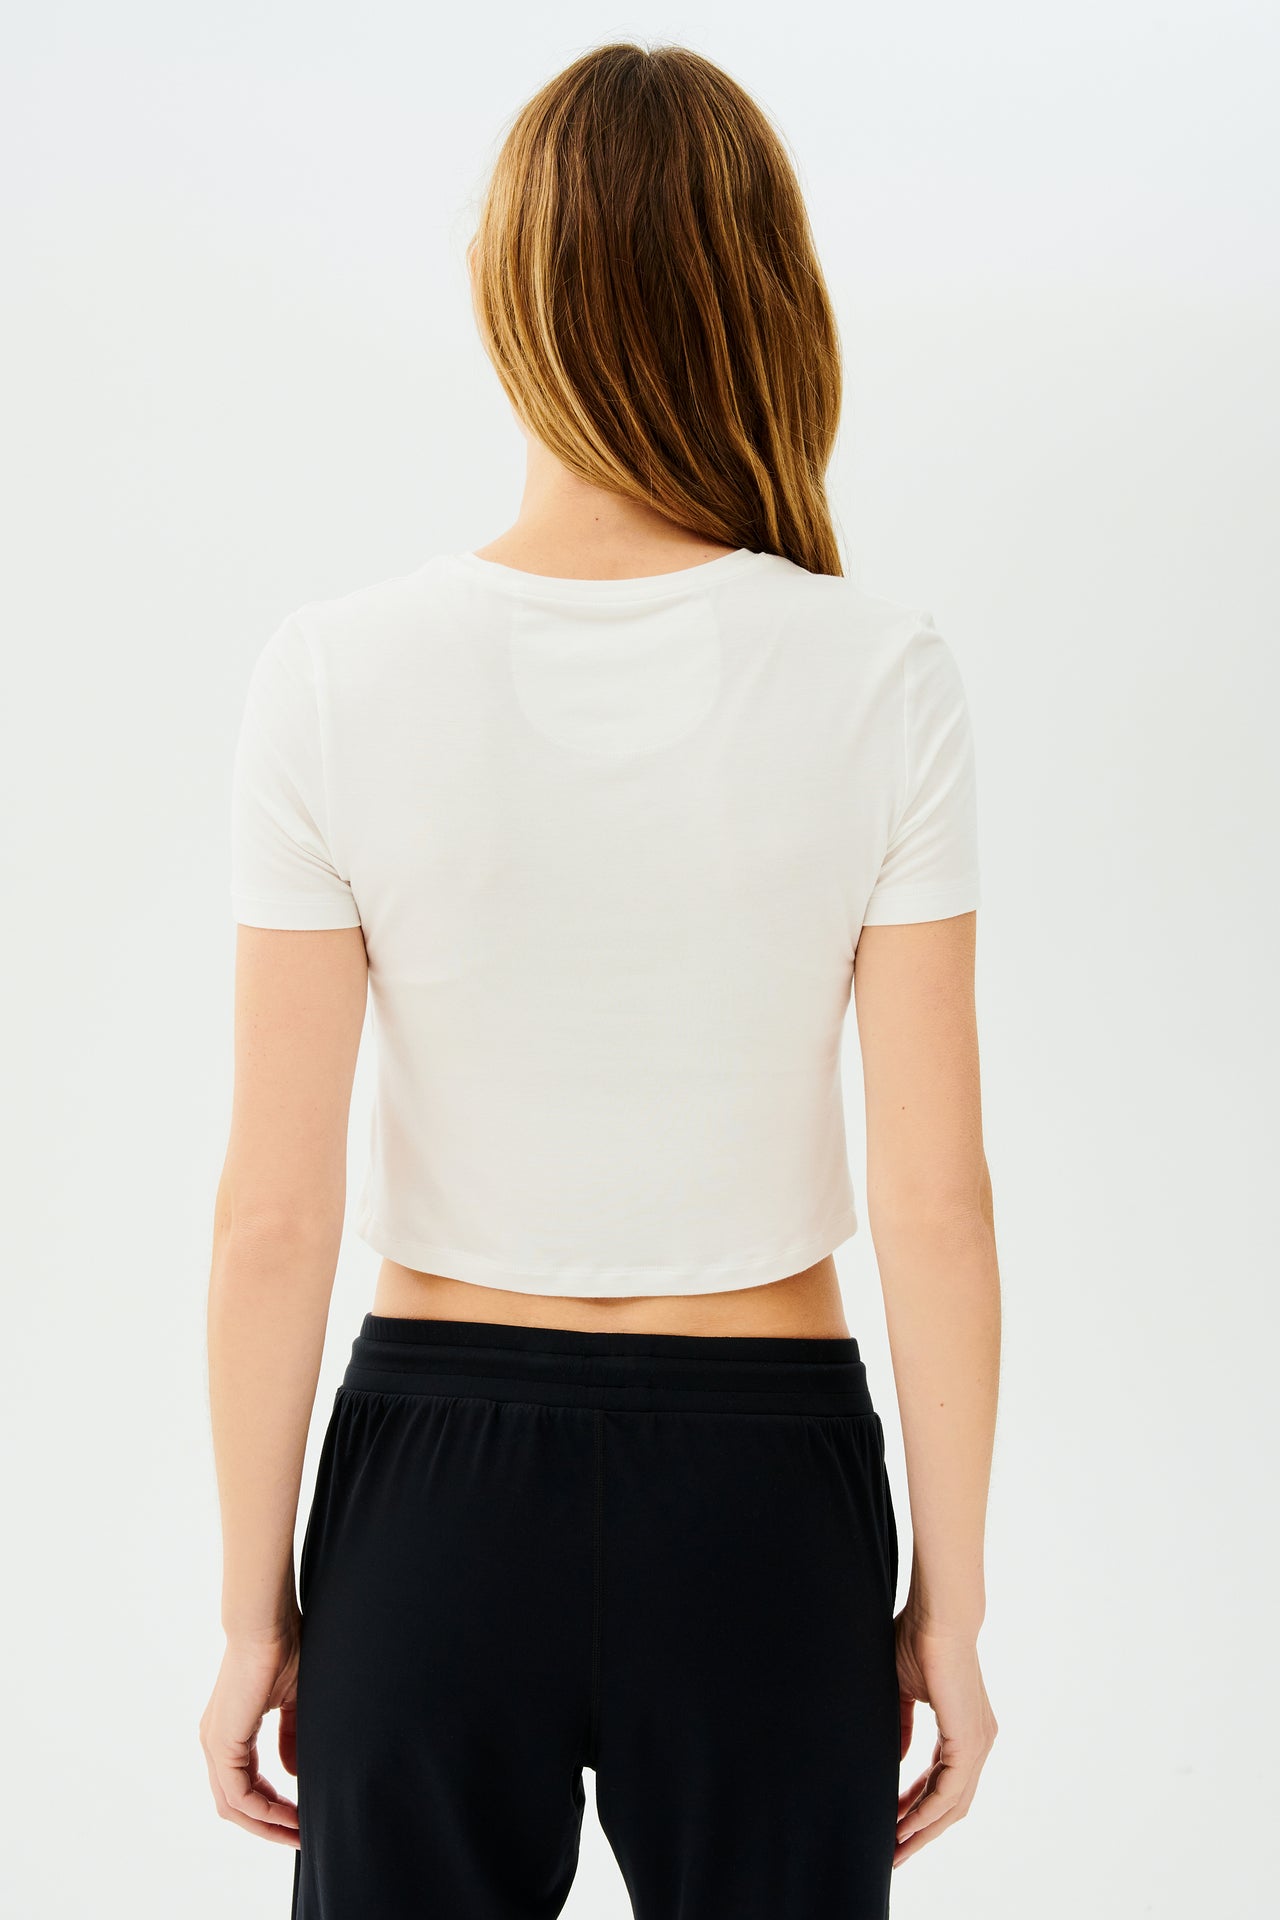 The back view of a woman wearing a SPLITS59 Daisy Jersey Tee in White and black high waist leggings.